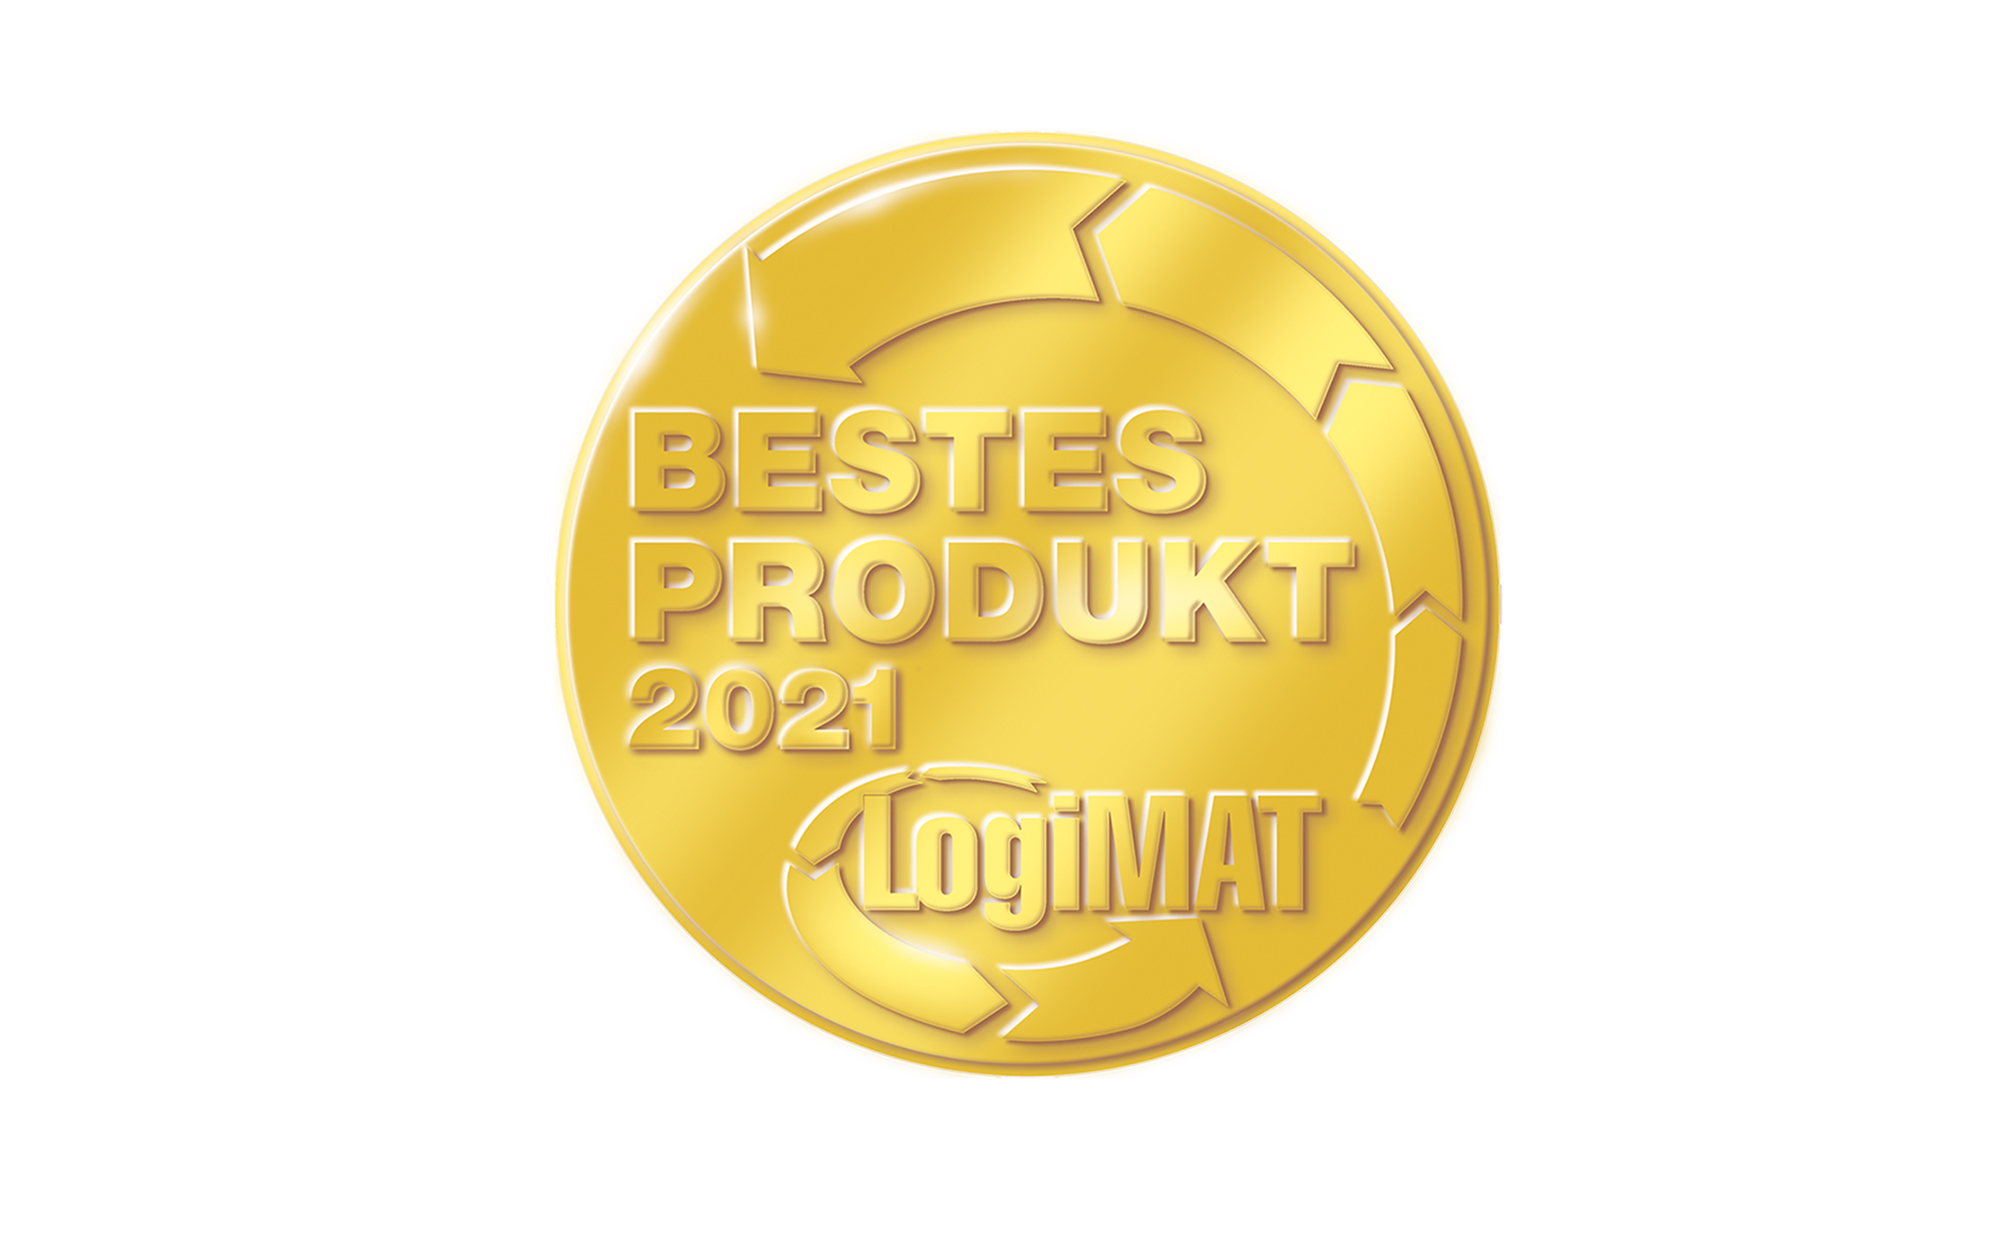 Grenzebach has been awarded "Best Product" of LogiMAT 2021